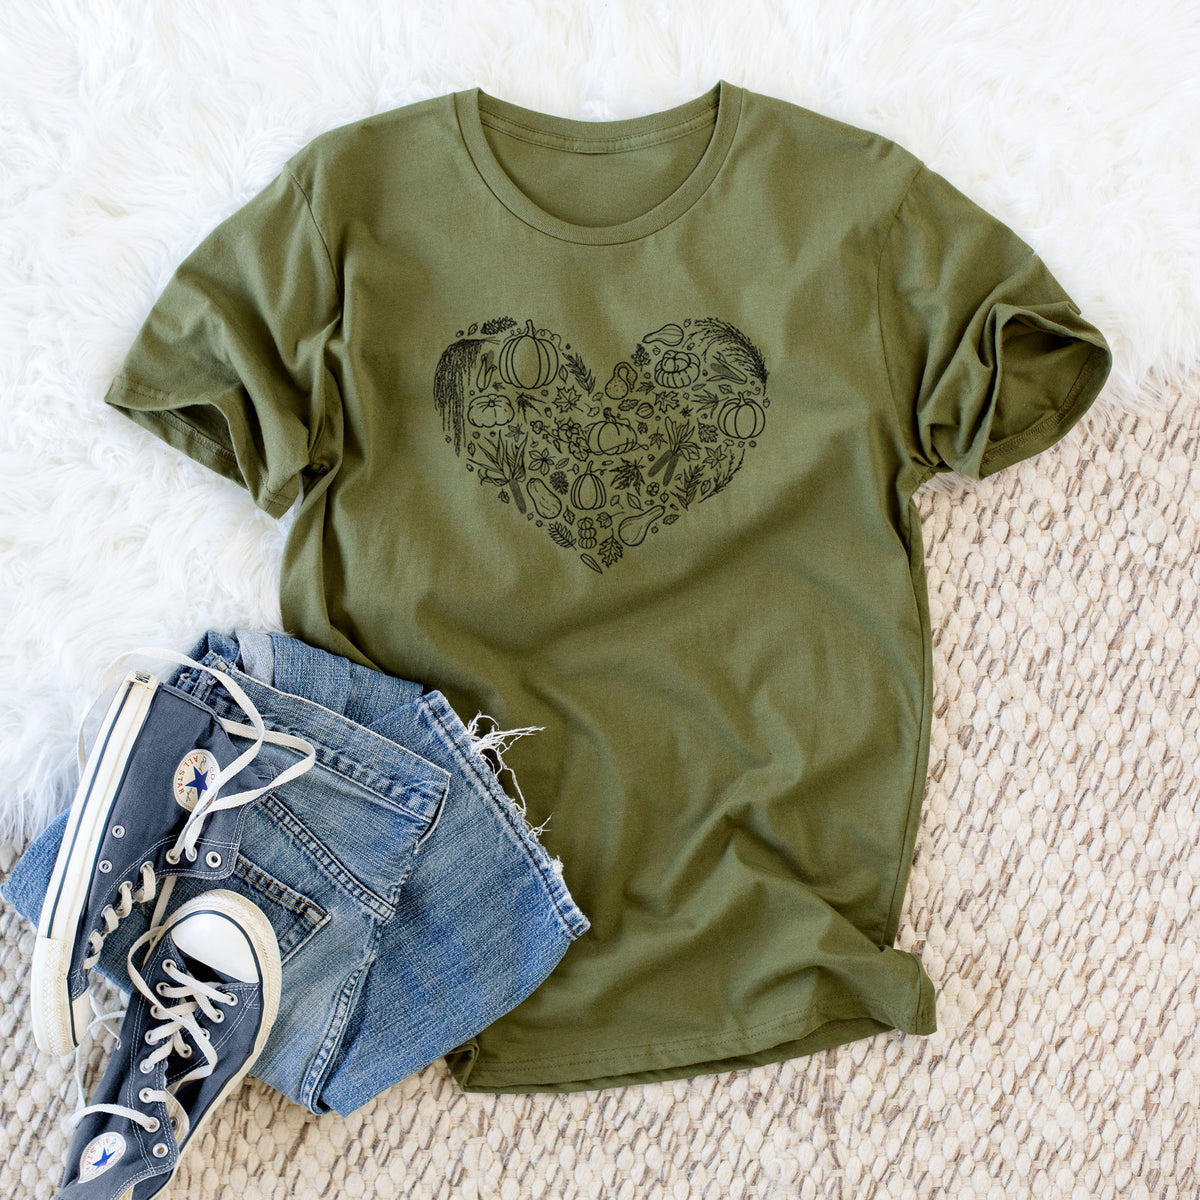 Heart Full of Fall - Unisex Crewneck - Made in USA - 100% Organic Cotton